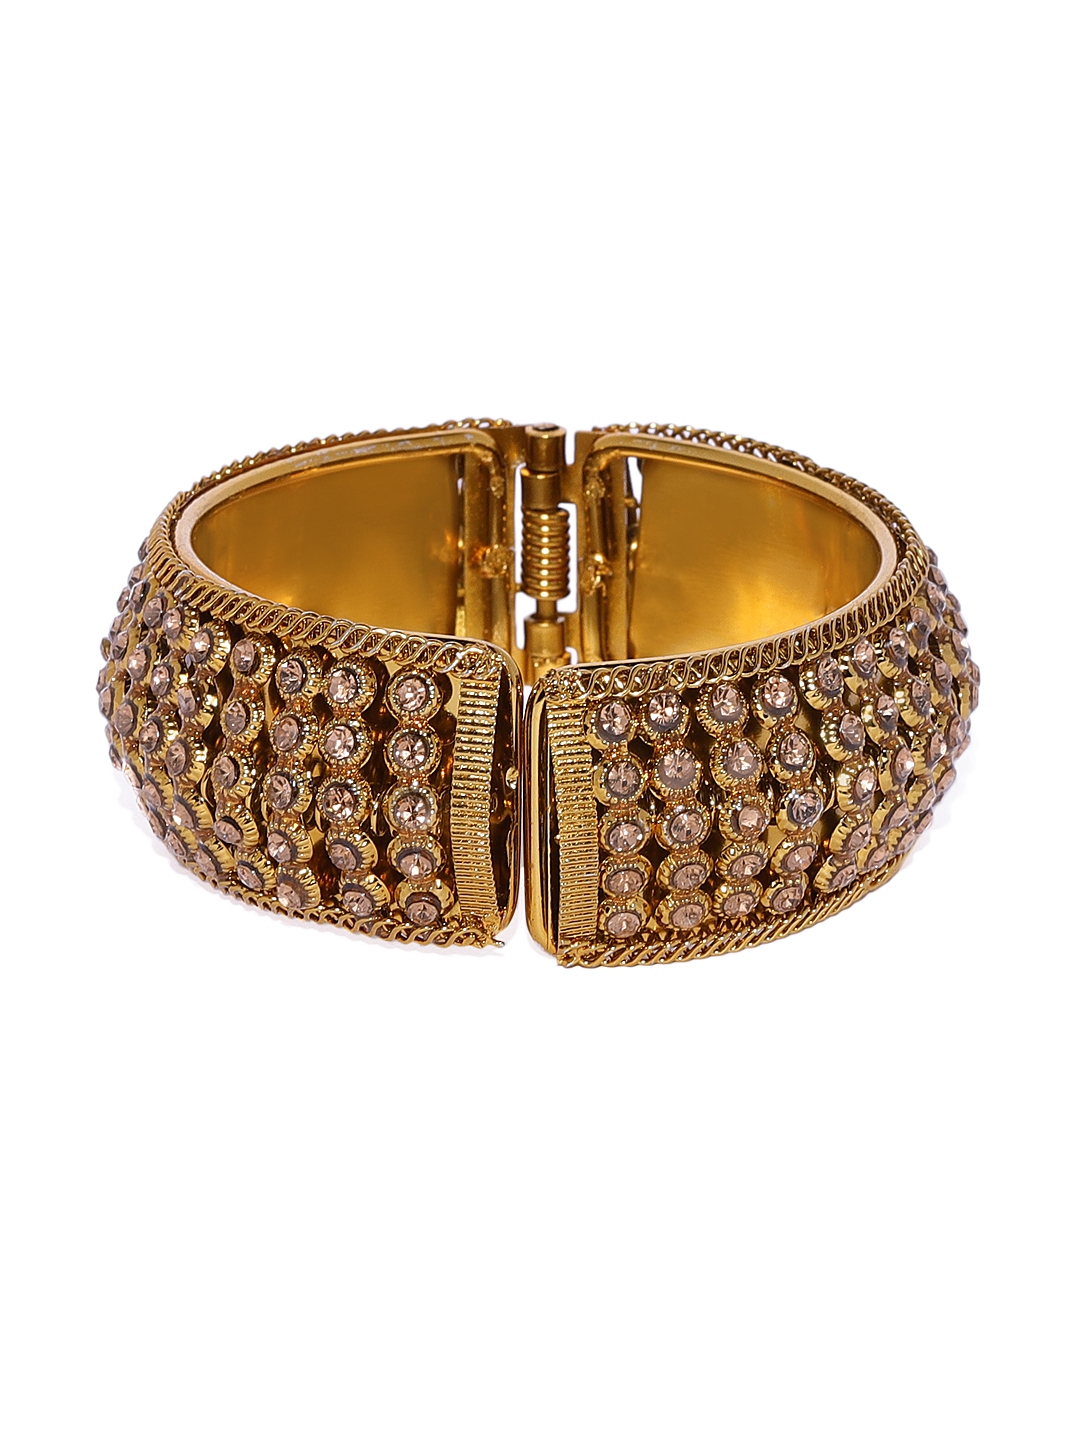 Shop the VictorianStyle Temple CZ Bangles for a Touch of Vintage Glamour  B25729